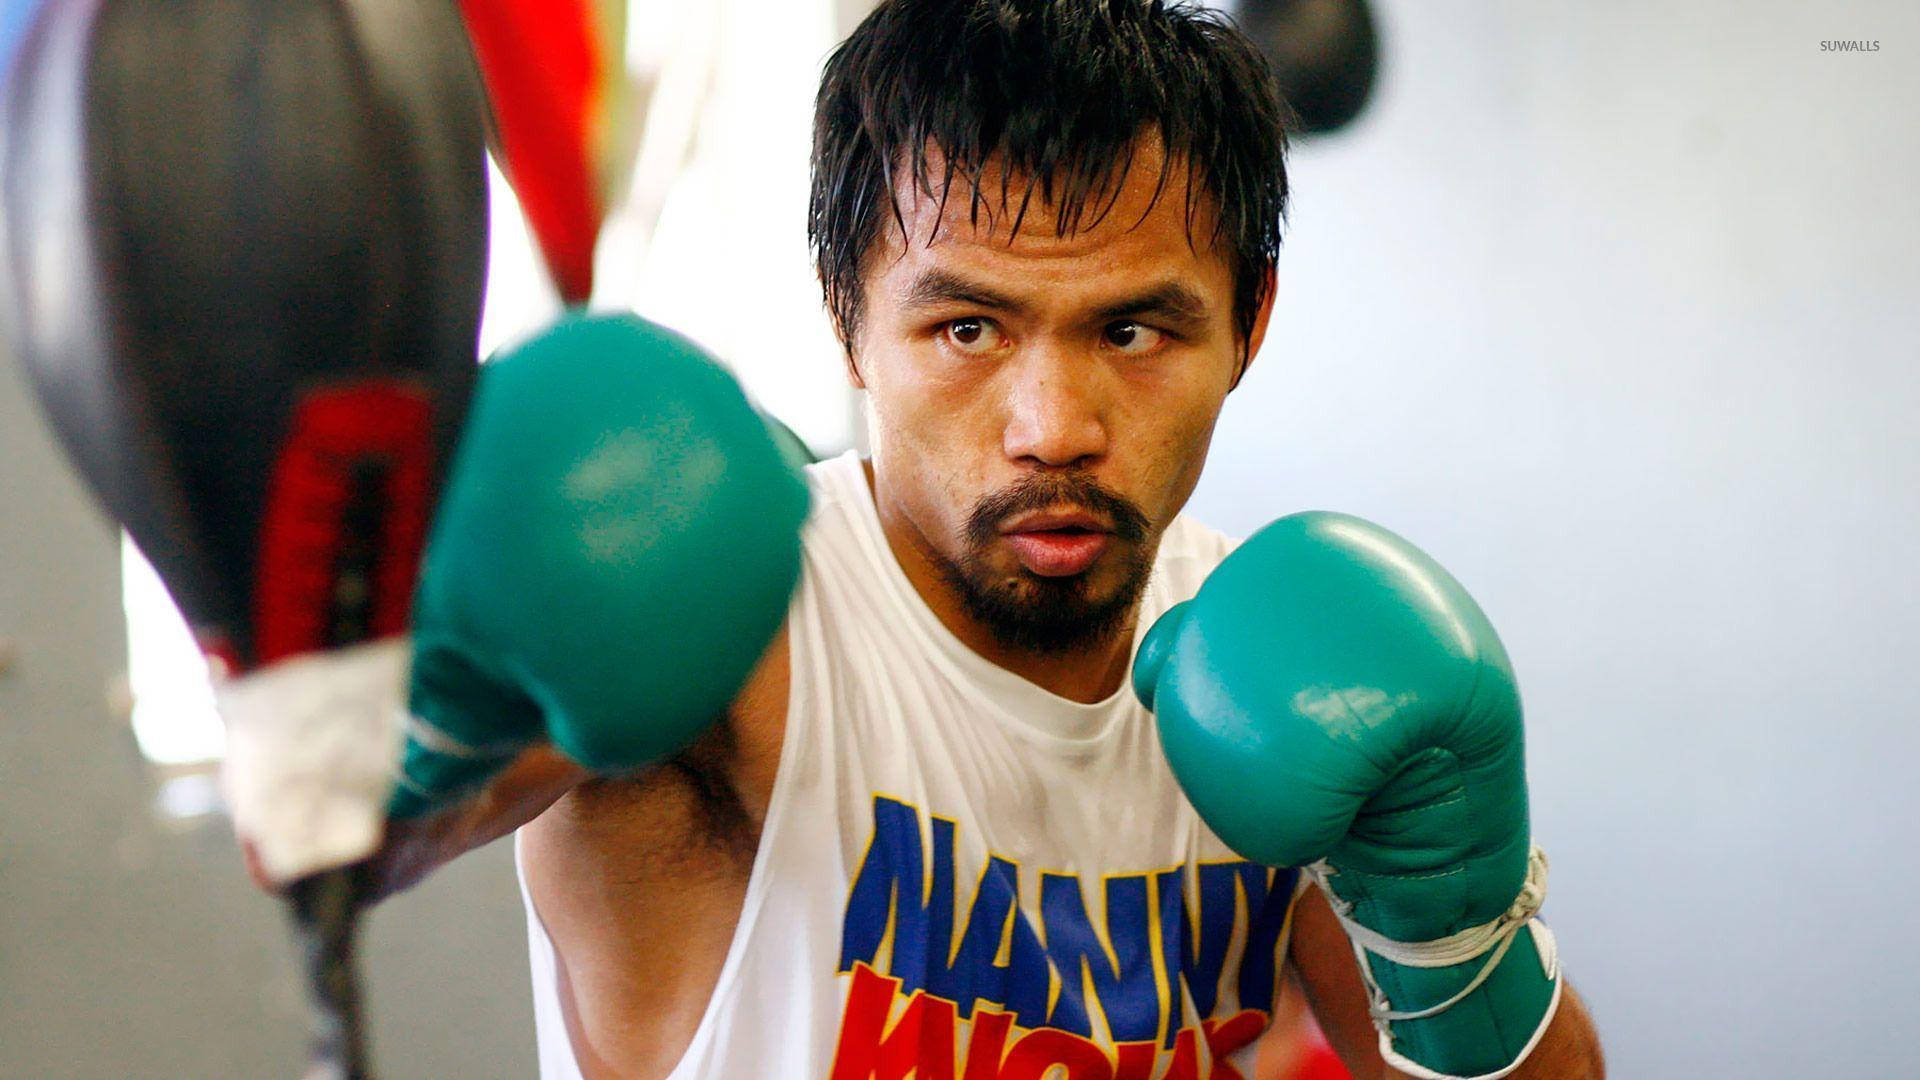 Manny Pacquiao Practice Session Wallpaper